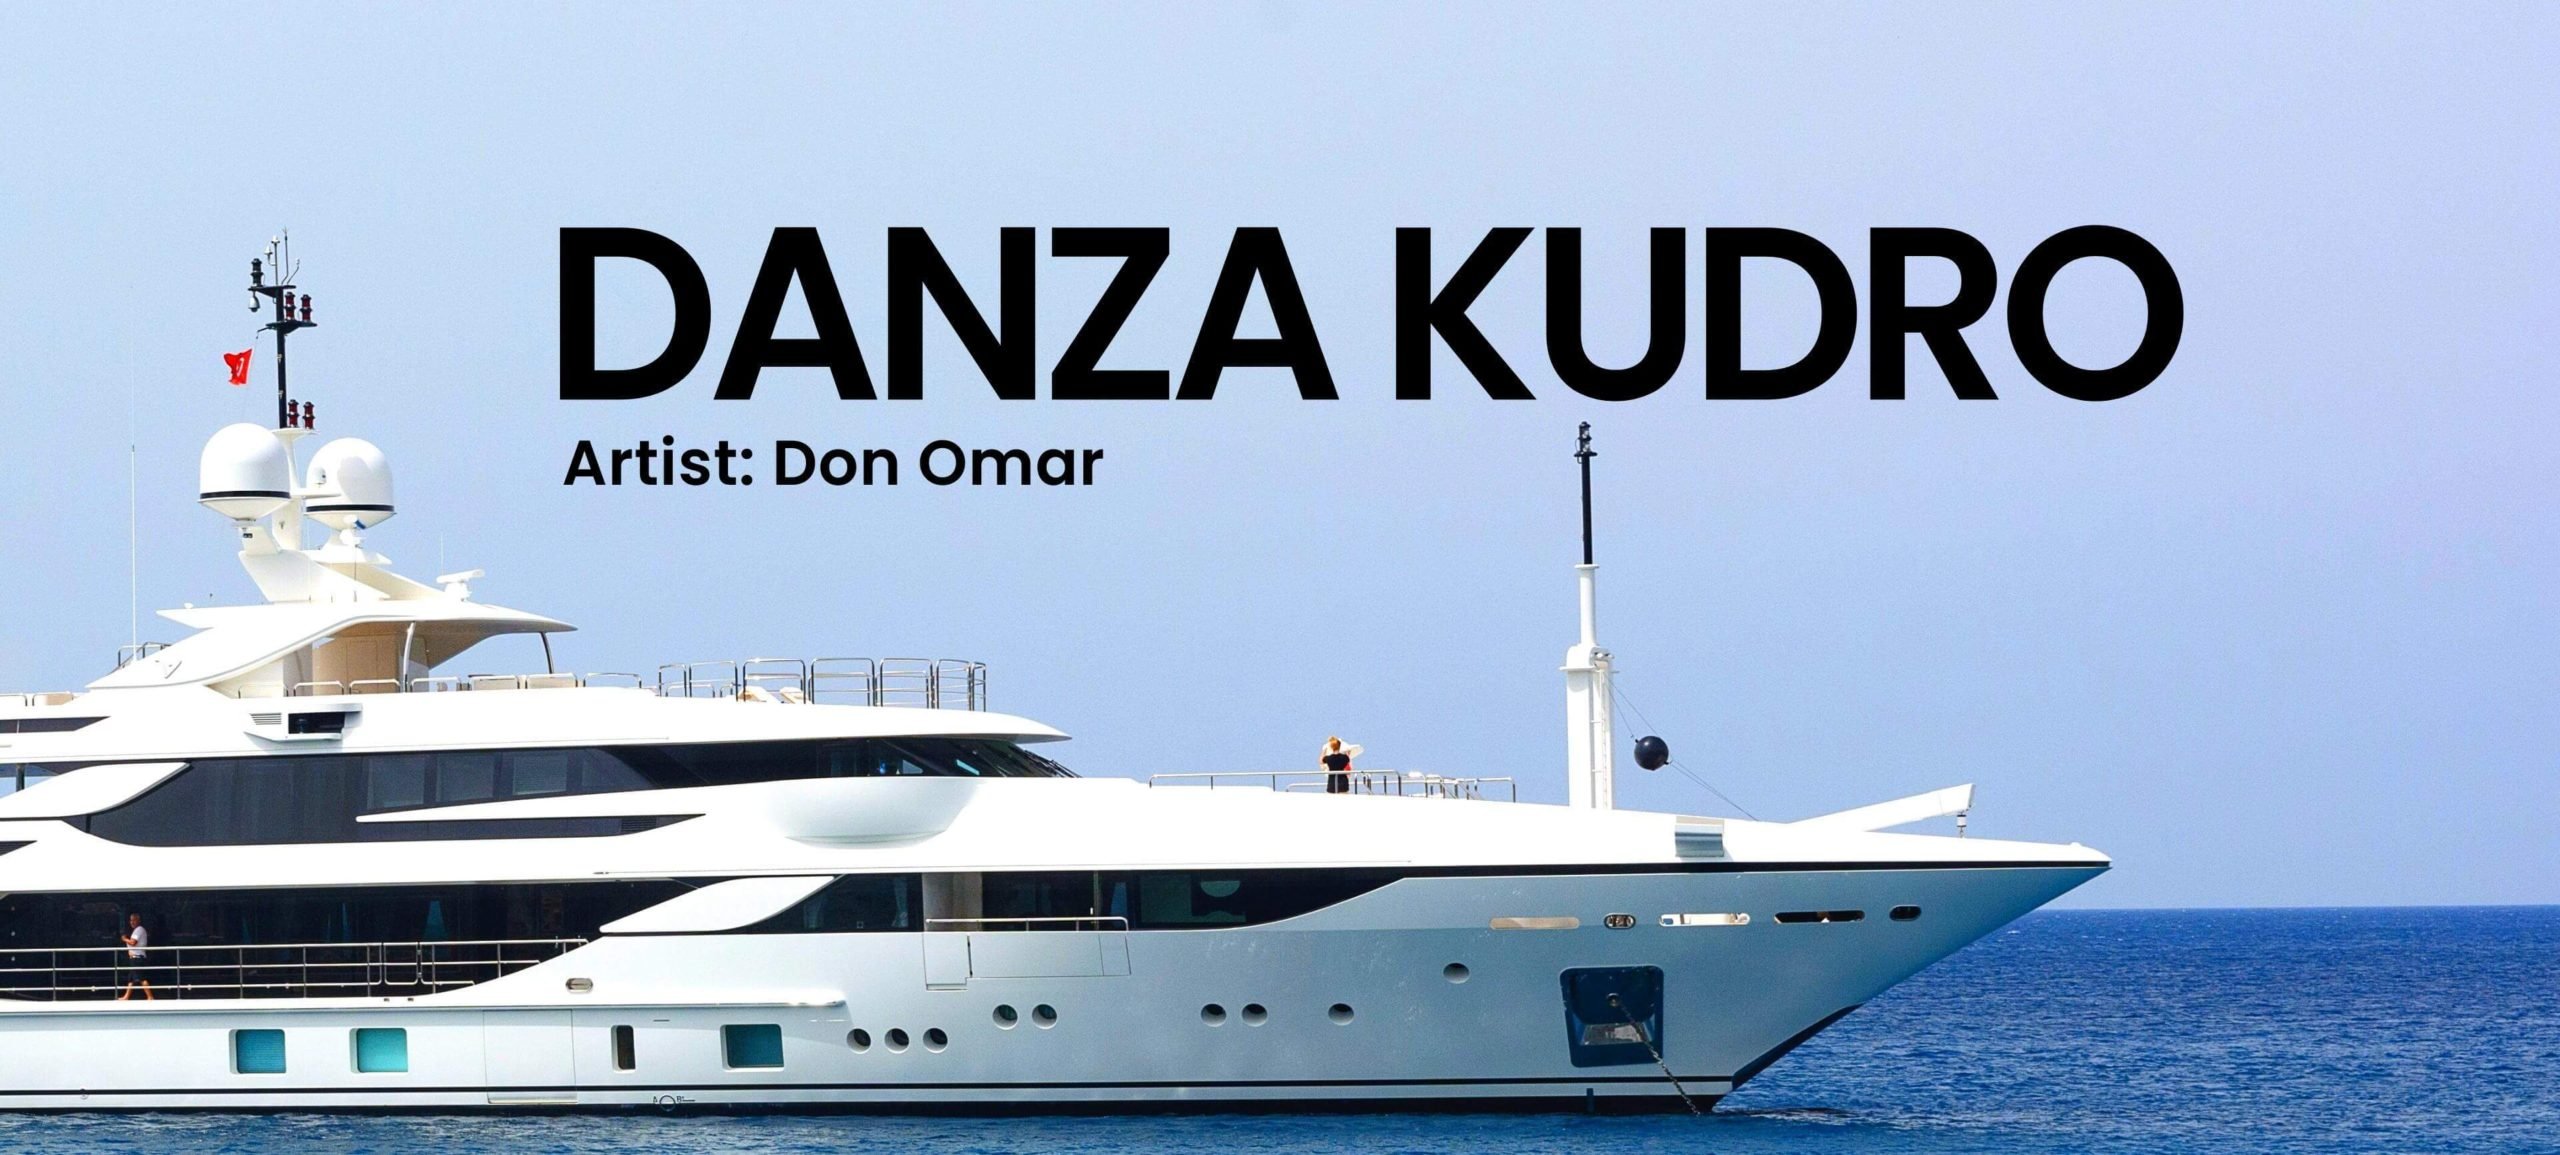 "Danza kudro" Streamed Song on Spotify